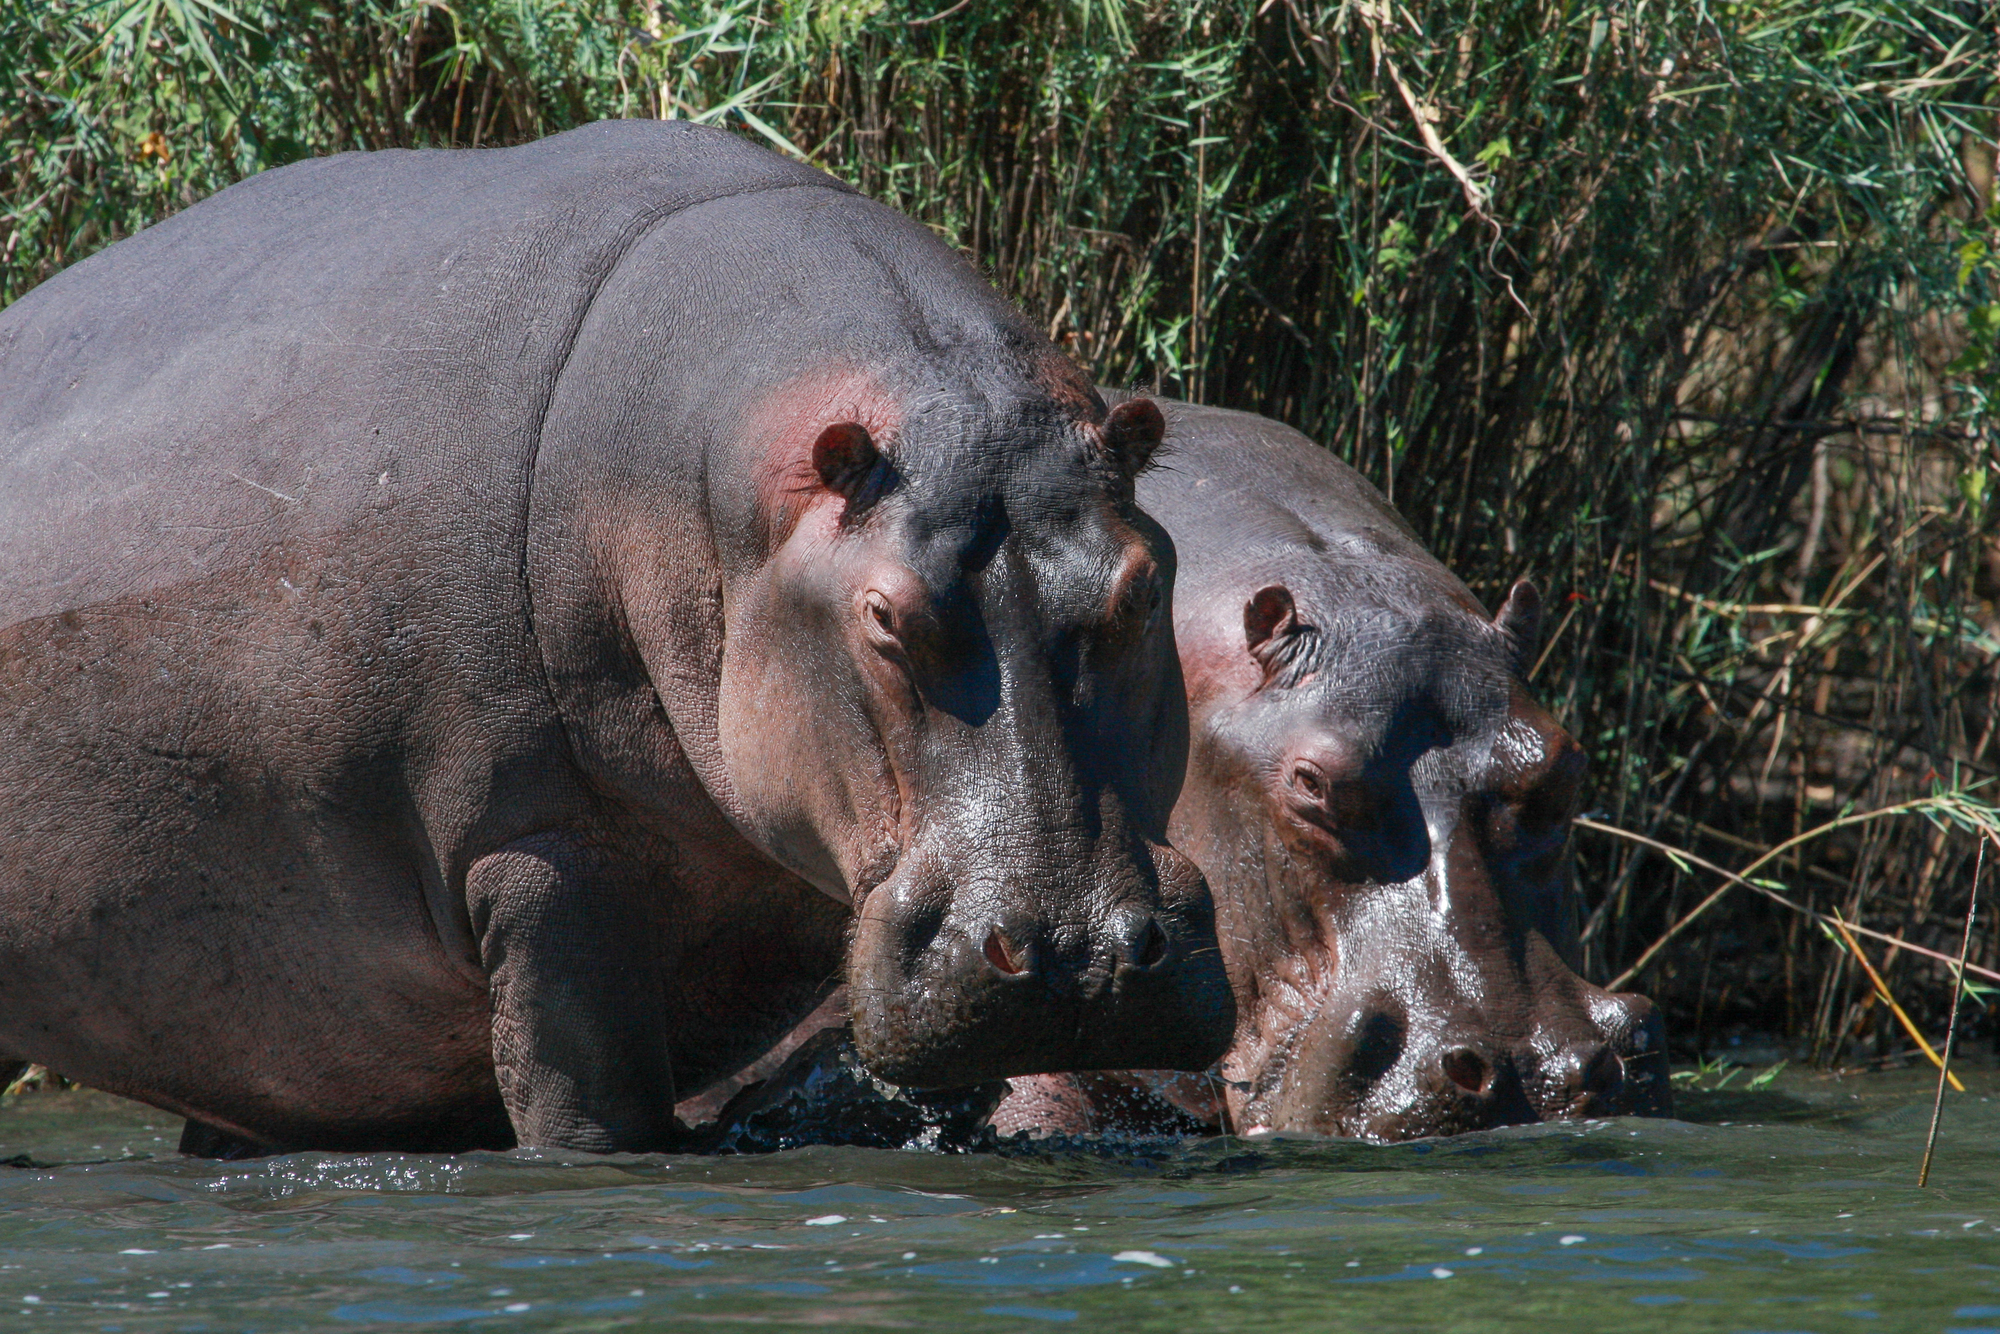 Hippos in Kafue National Park, Zambia. Image credit: Courtesy of Grégoire Dubois